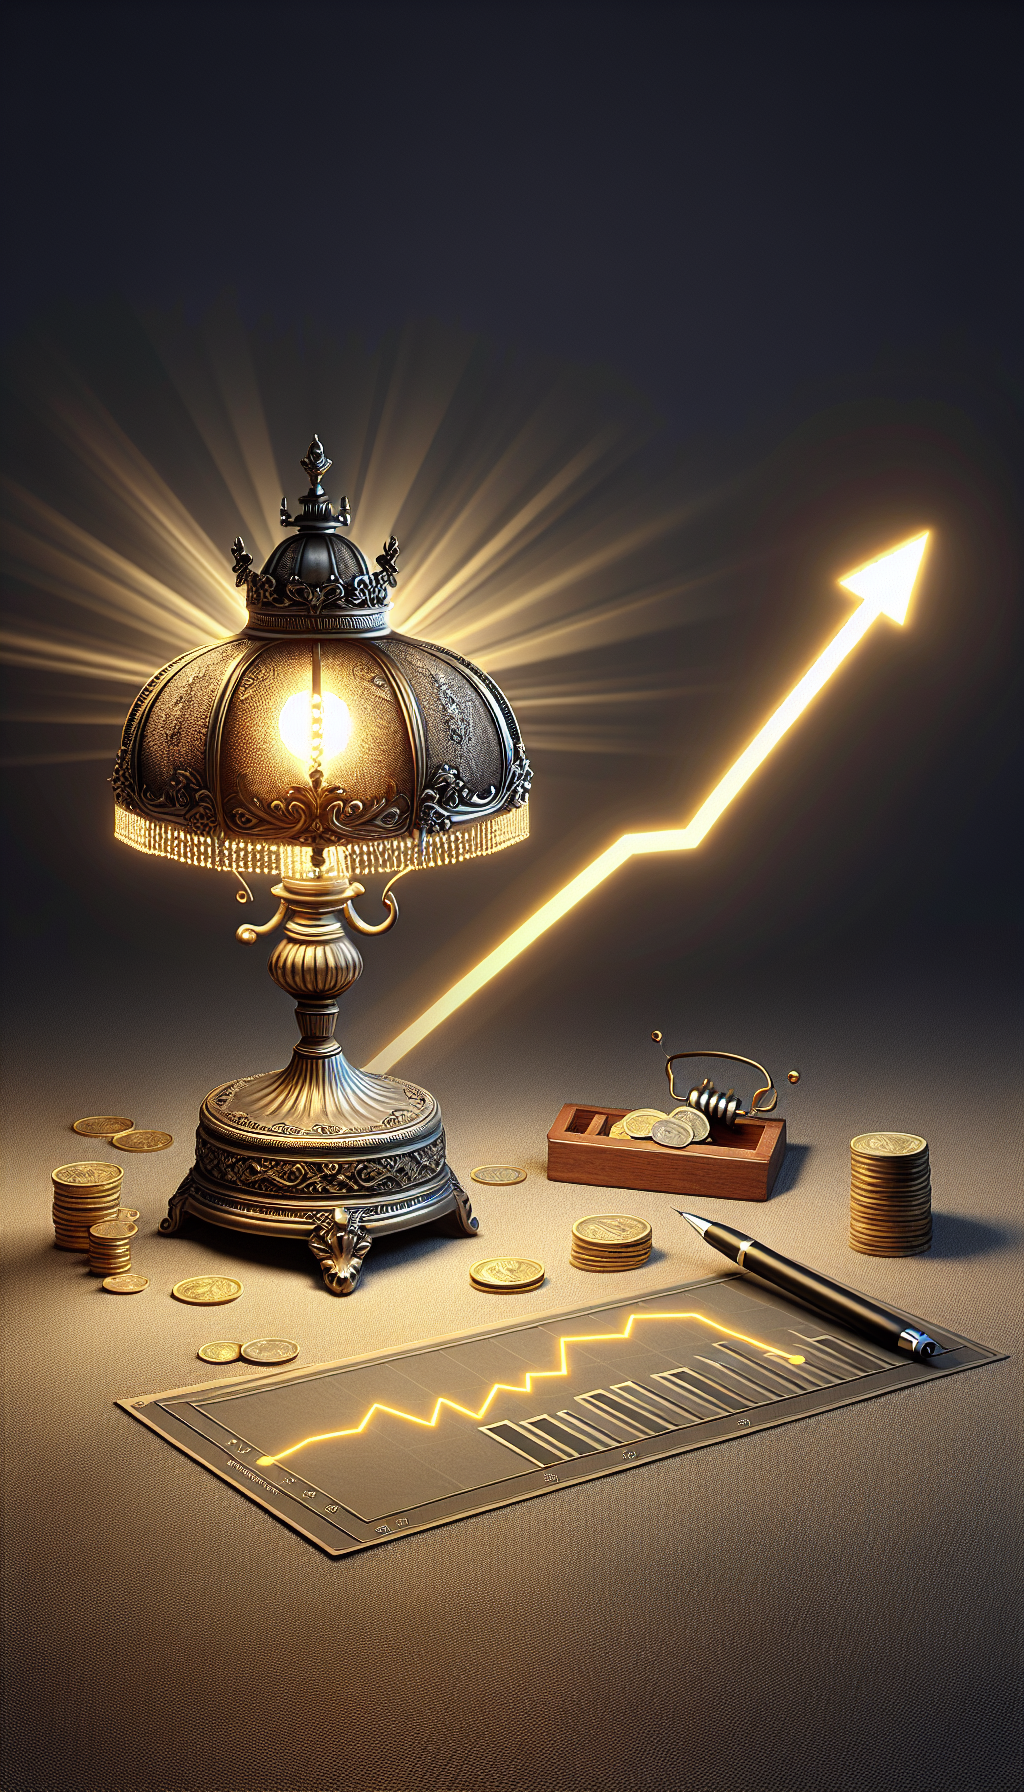 An illustration depicts an antique lamp casting a radiant glow onto a graph with an upward trend, encapsulating the concept of increasing market value. The lamp's ornate details suggest its vintage origins, while golden coins and appraisal tools subtly positioned in the foreground imply its assessed worth. The contrasting styles—photorealistic lamp and abstract, simplified financial elements—create a compelling visual metaphor.